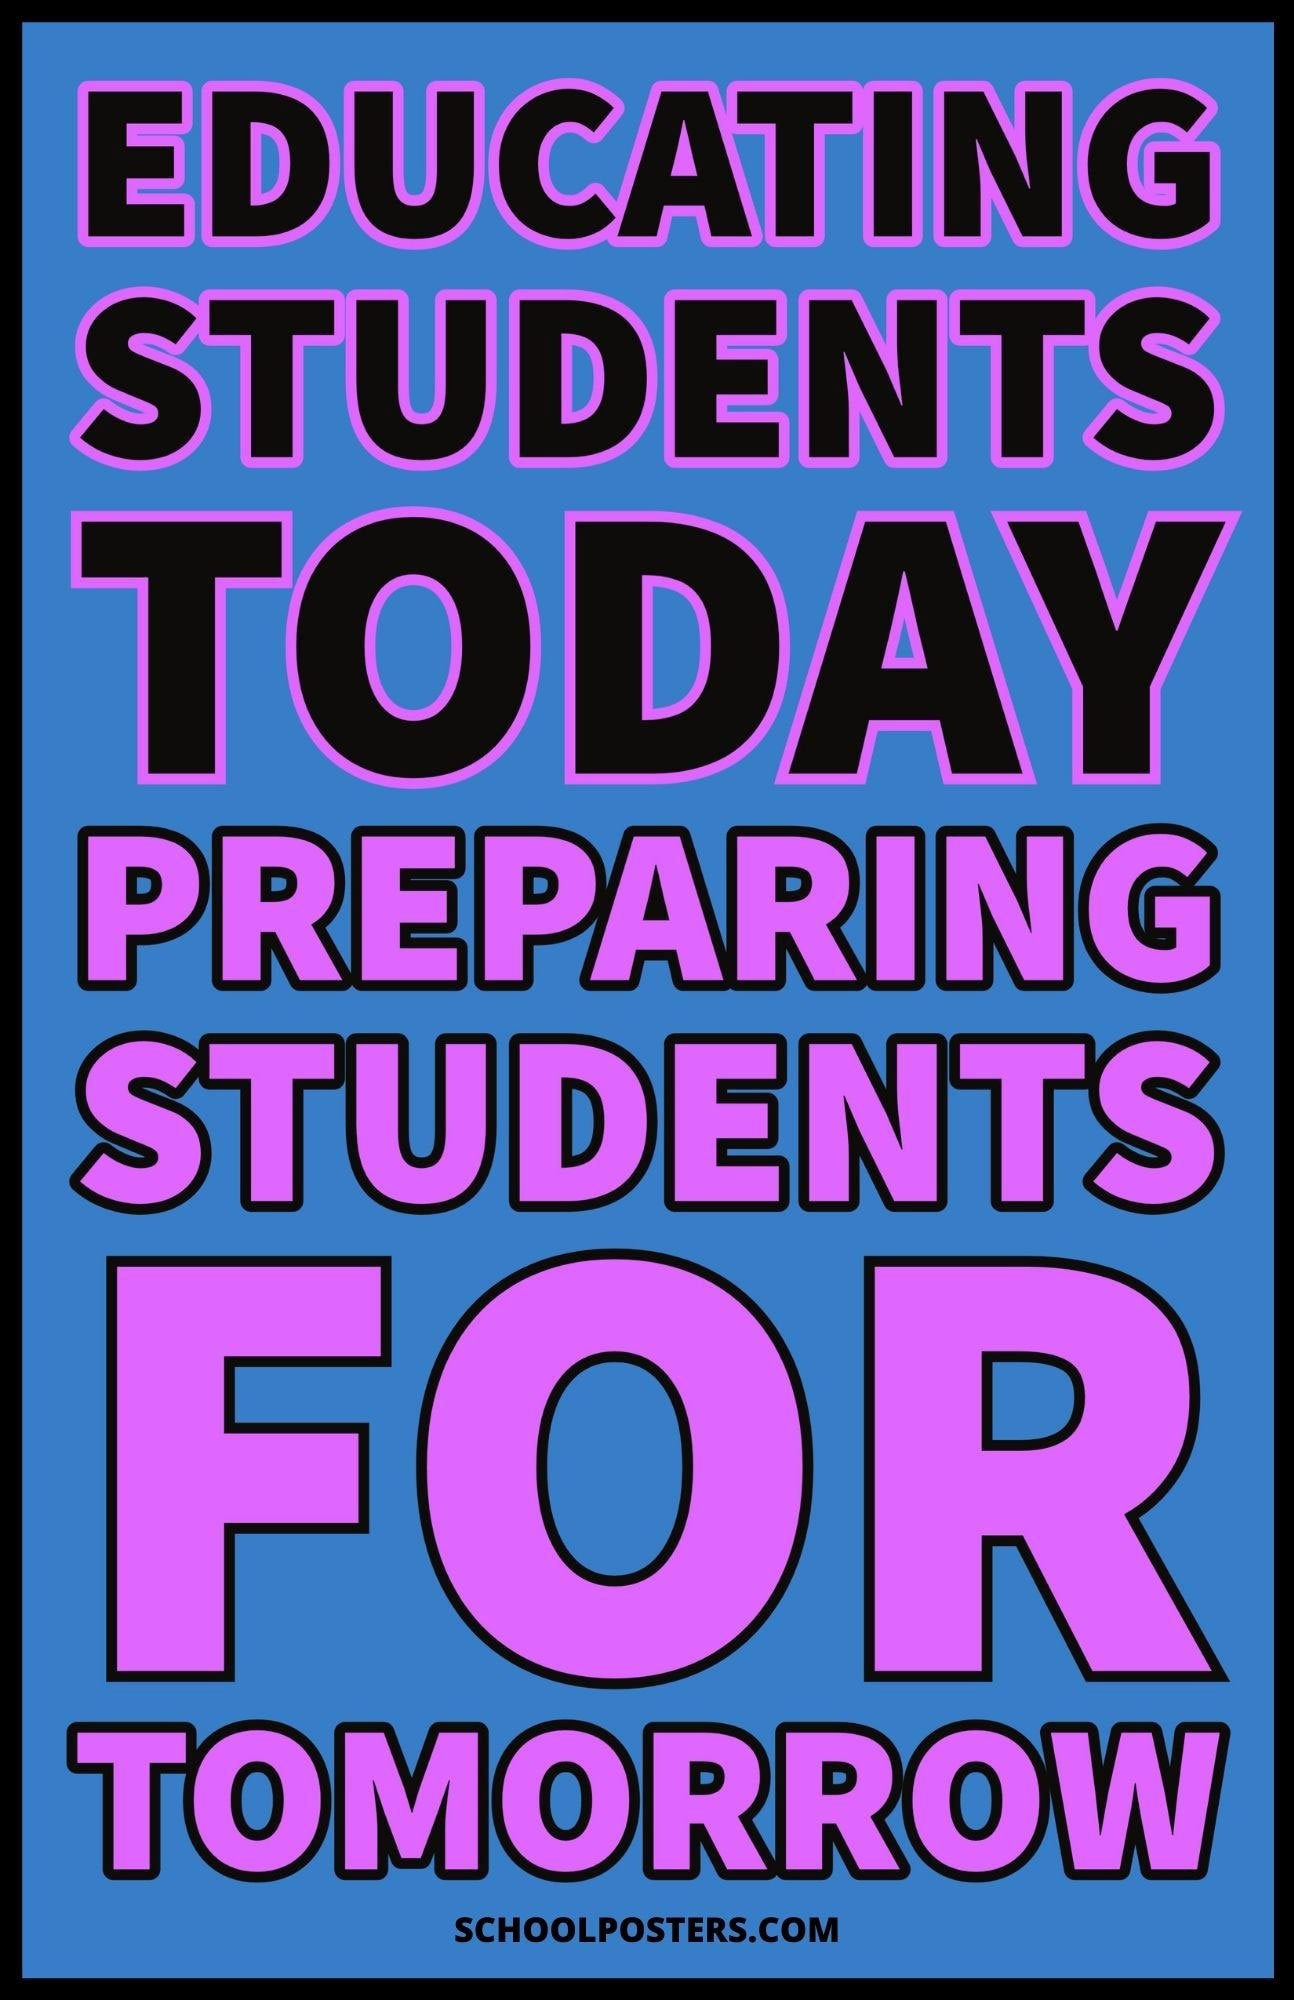 Educating Students Today Poster